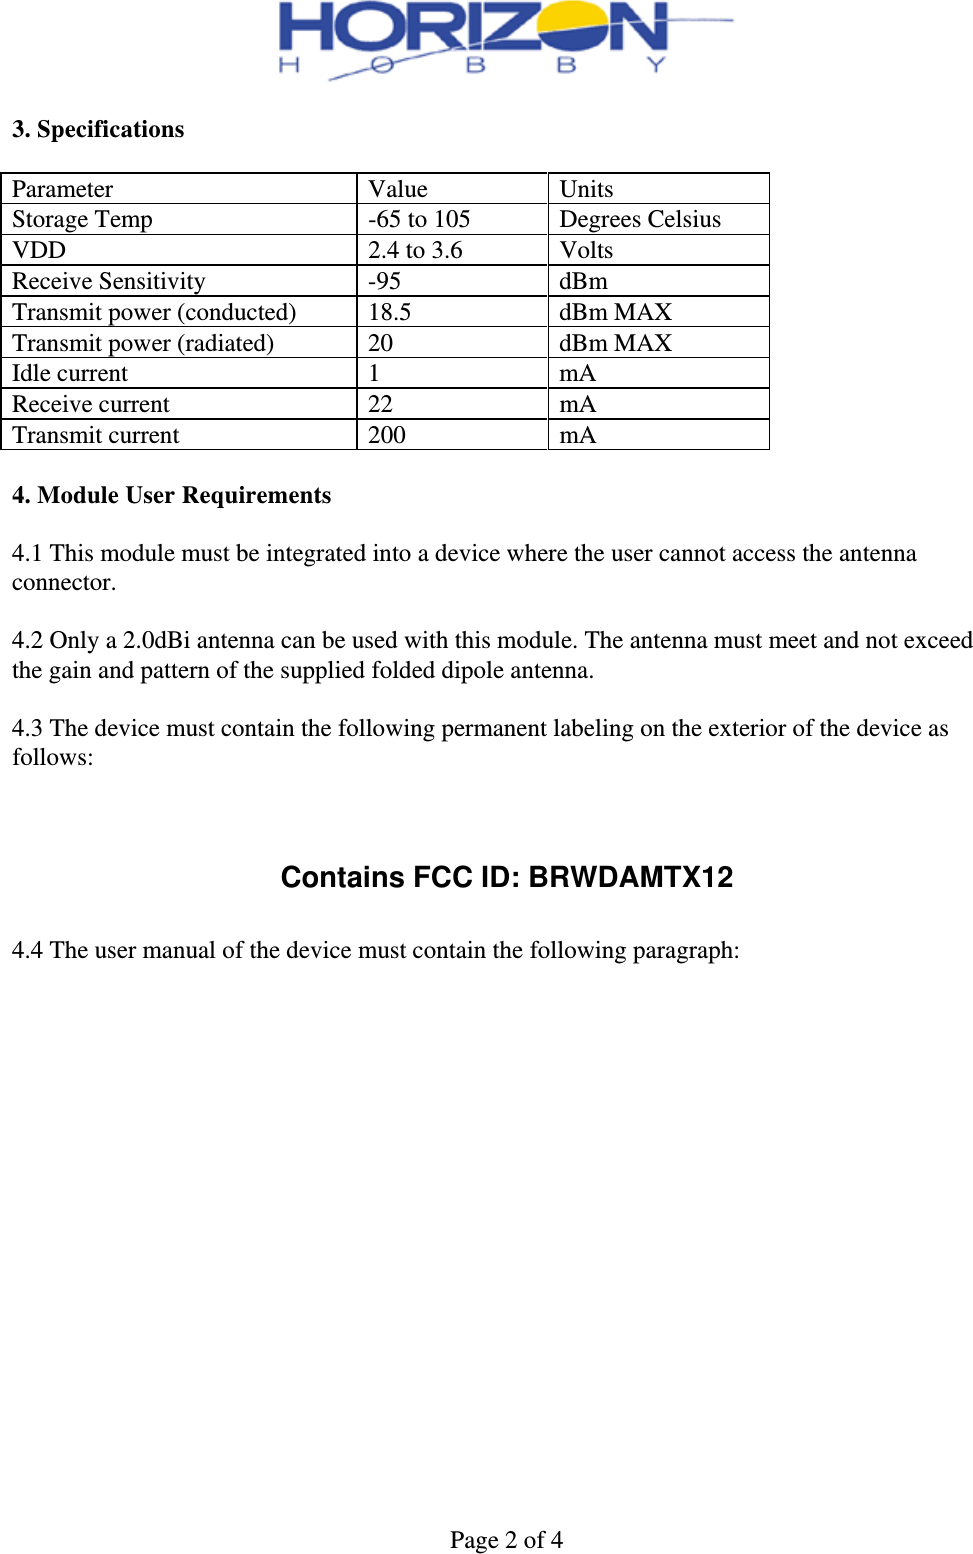  Page 2 of 4  3. Specifications  Parameter Value Units Storage Temp  -65 to 105  Degrees Celsius VDD  2.4 to 3.6  Volts Receive Sensitivity  -95  dBm Transmit power (conducted)  18.5  dBm MAX Transmit power (radiated)  20  dBm MAX Idle current  1  mA Receive current  22  mA Transmit current  200  mA  4. Module User Requirements  4.1 This module must be integrated into a device where the user cannot access the antenna connector.  4.2 Only a 2.0dBi antenna can be used with this module. The antenna must meet and not exceed the gain and pattern of the supplied folded dipole antenna.  4.3 The device must contain the following permanent labeling on the exterior of the device as follows:    Contains FCC ID: BRWDAMTX12  4.4 The user manual of the device must contain the following paragraph:  